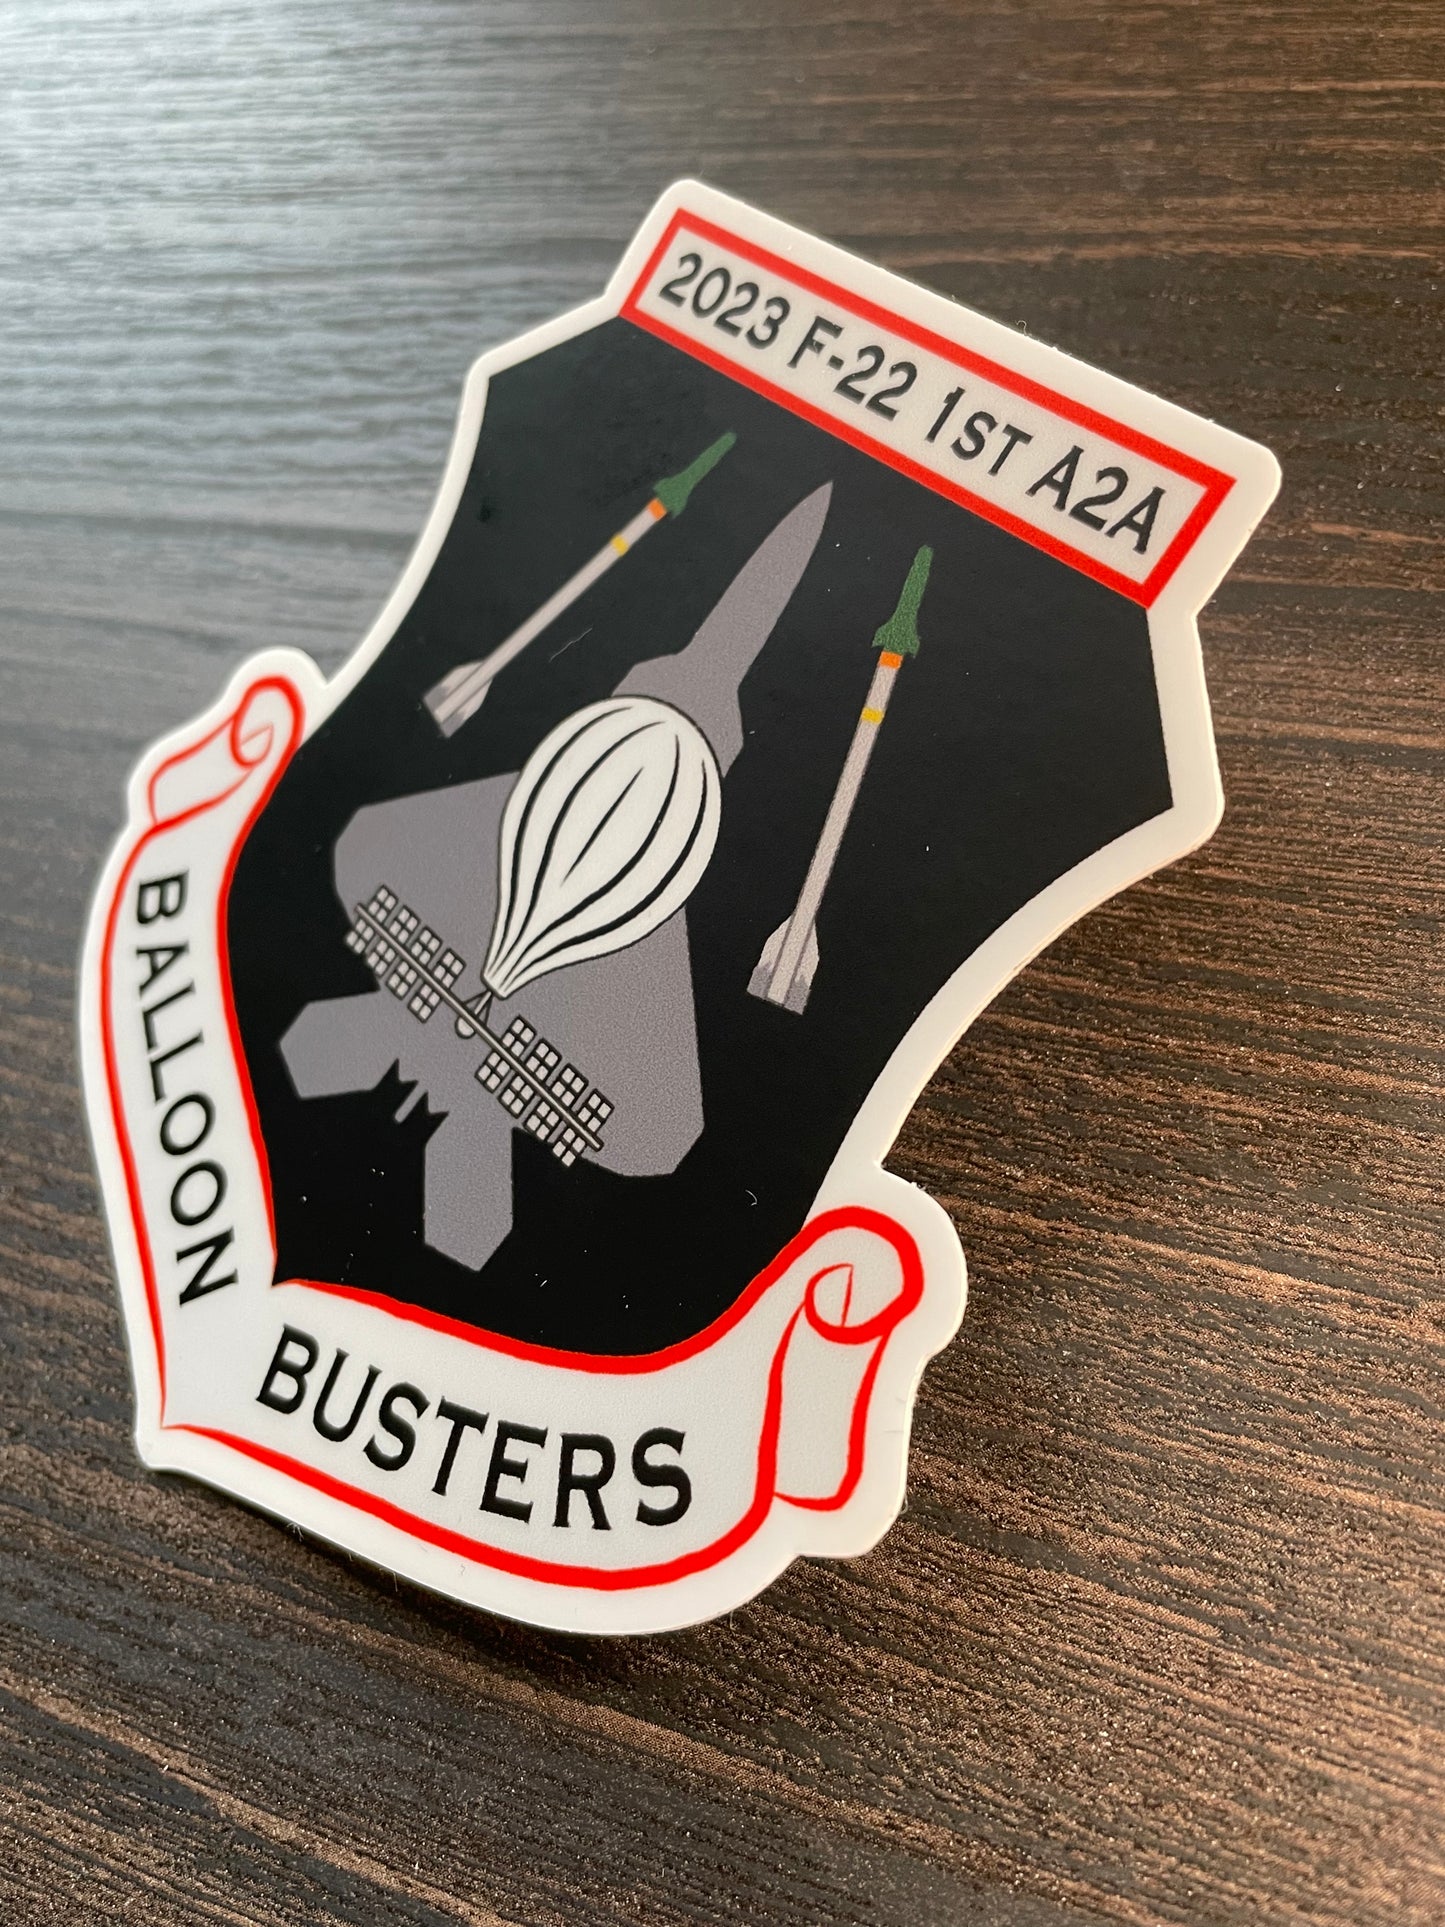 F22 Raptor “Balloon Busters” First Air-To-Air Kill Tribute Mission Patch Sticker